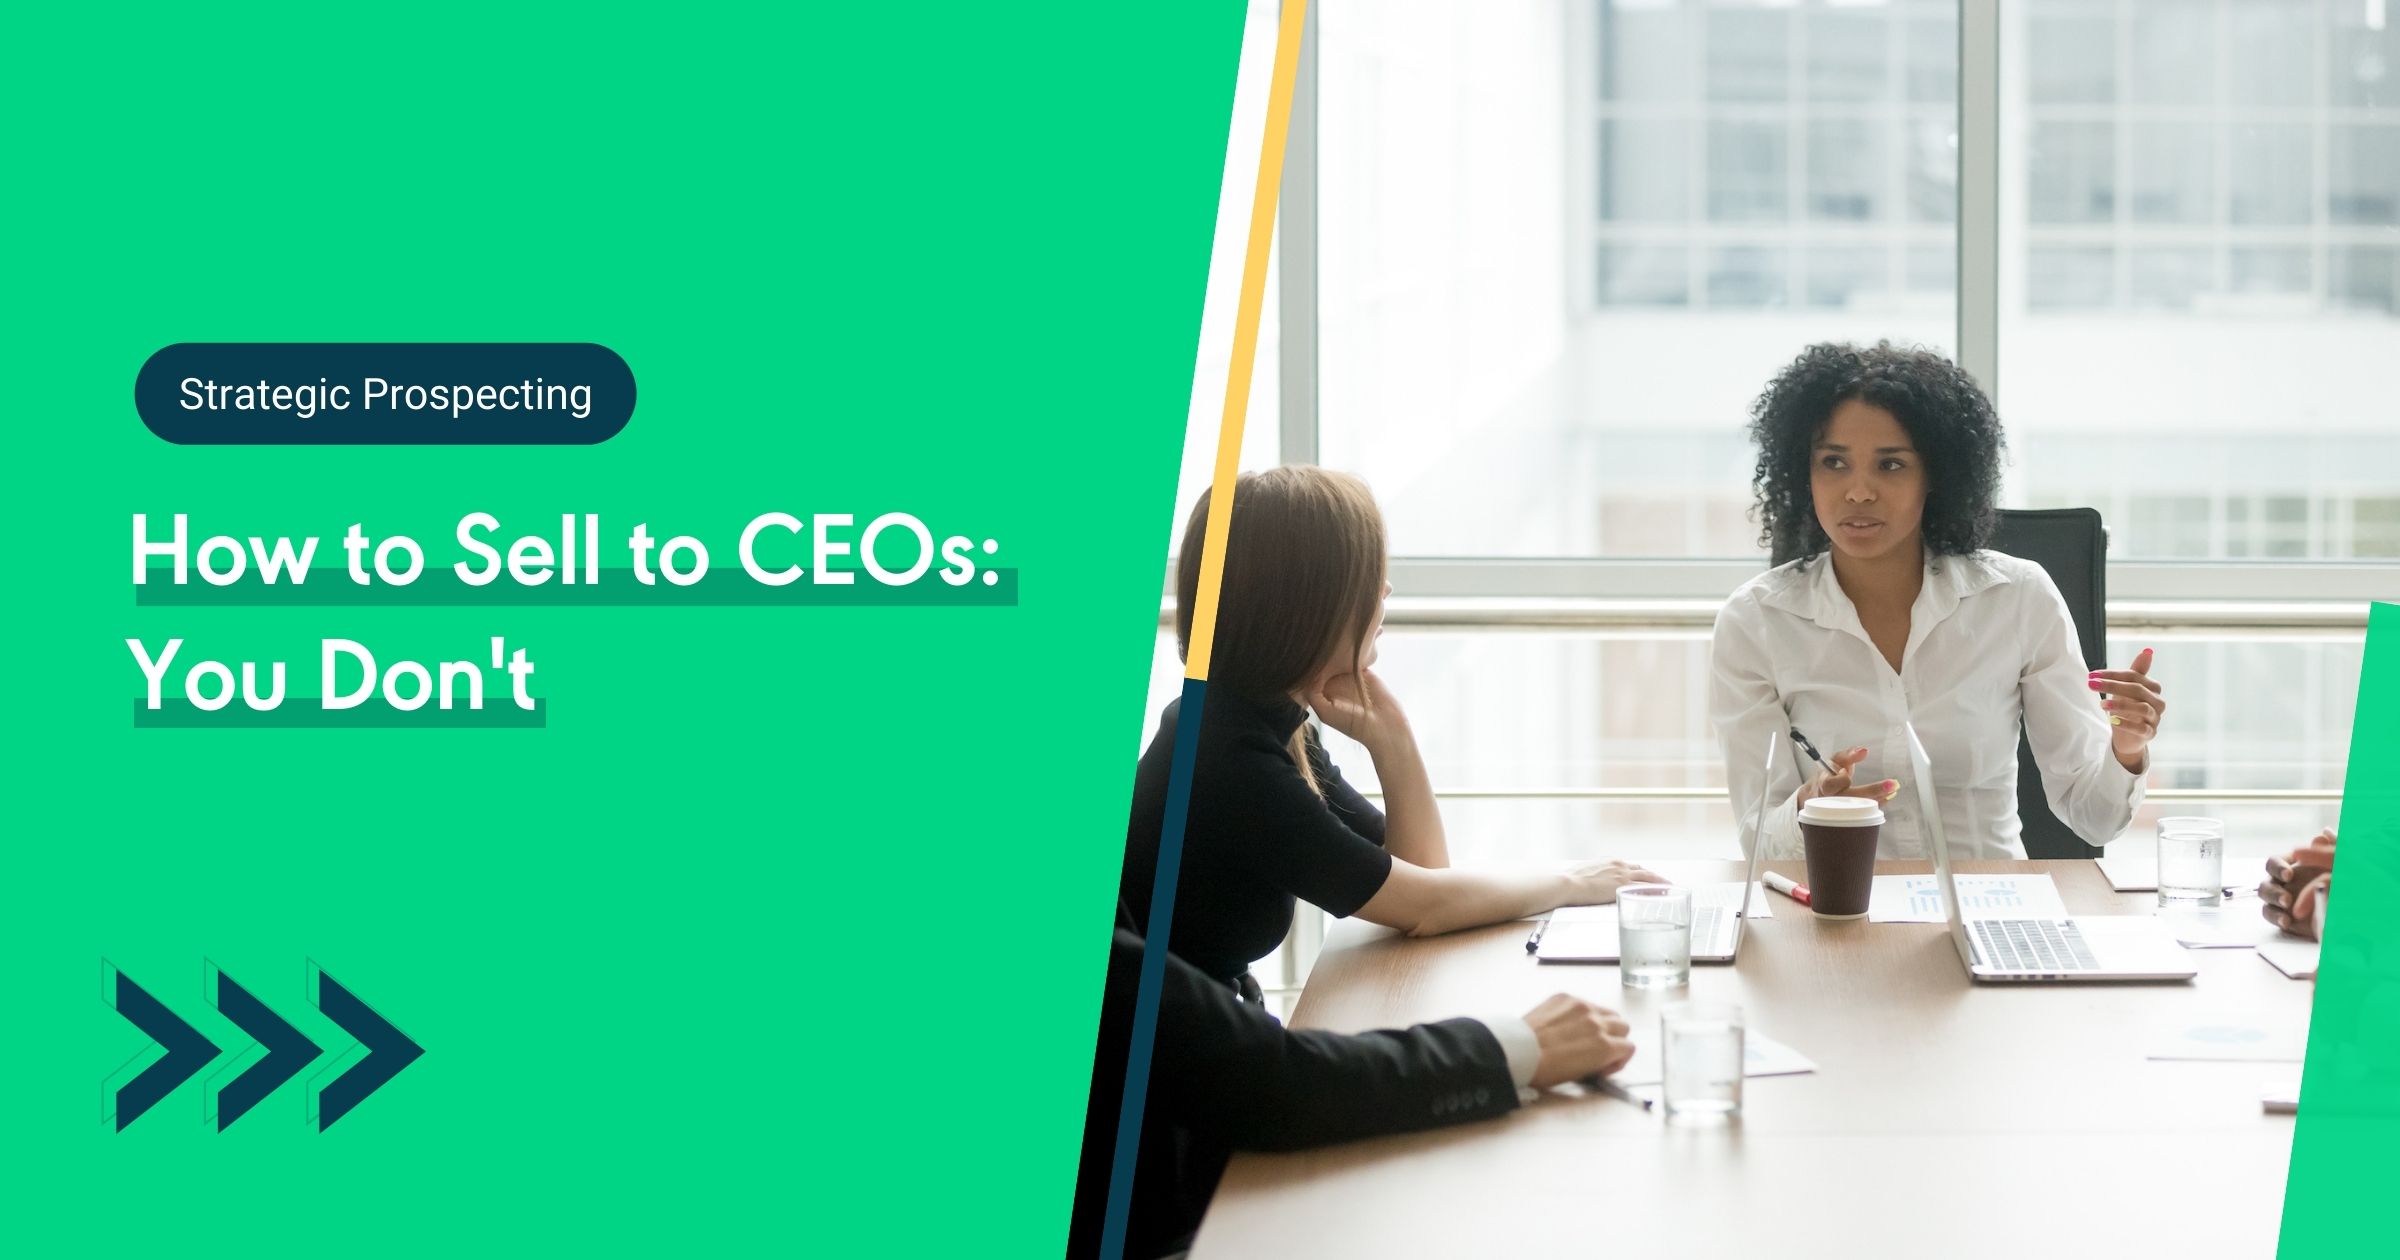 How to Sell to CEOs: You Don't